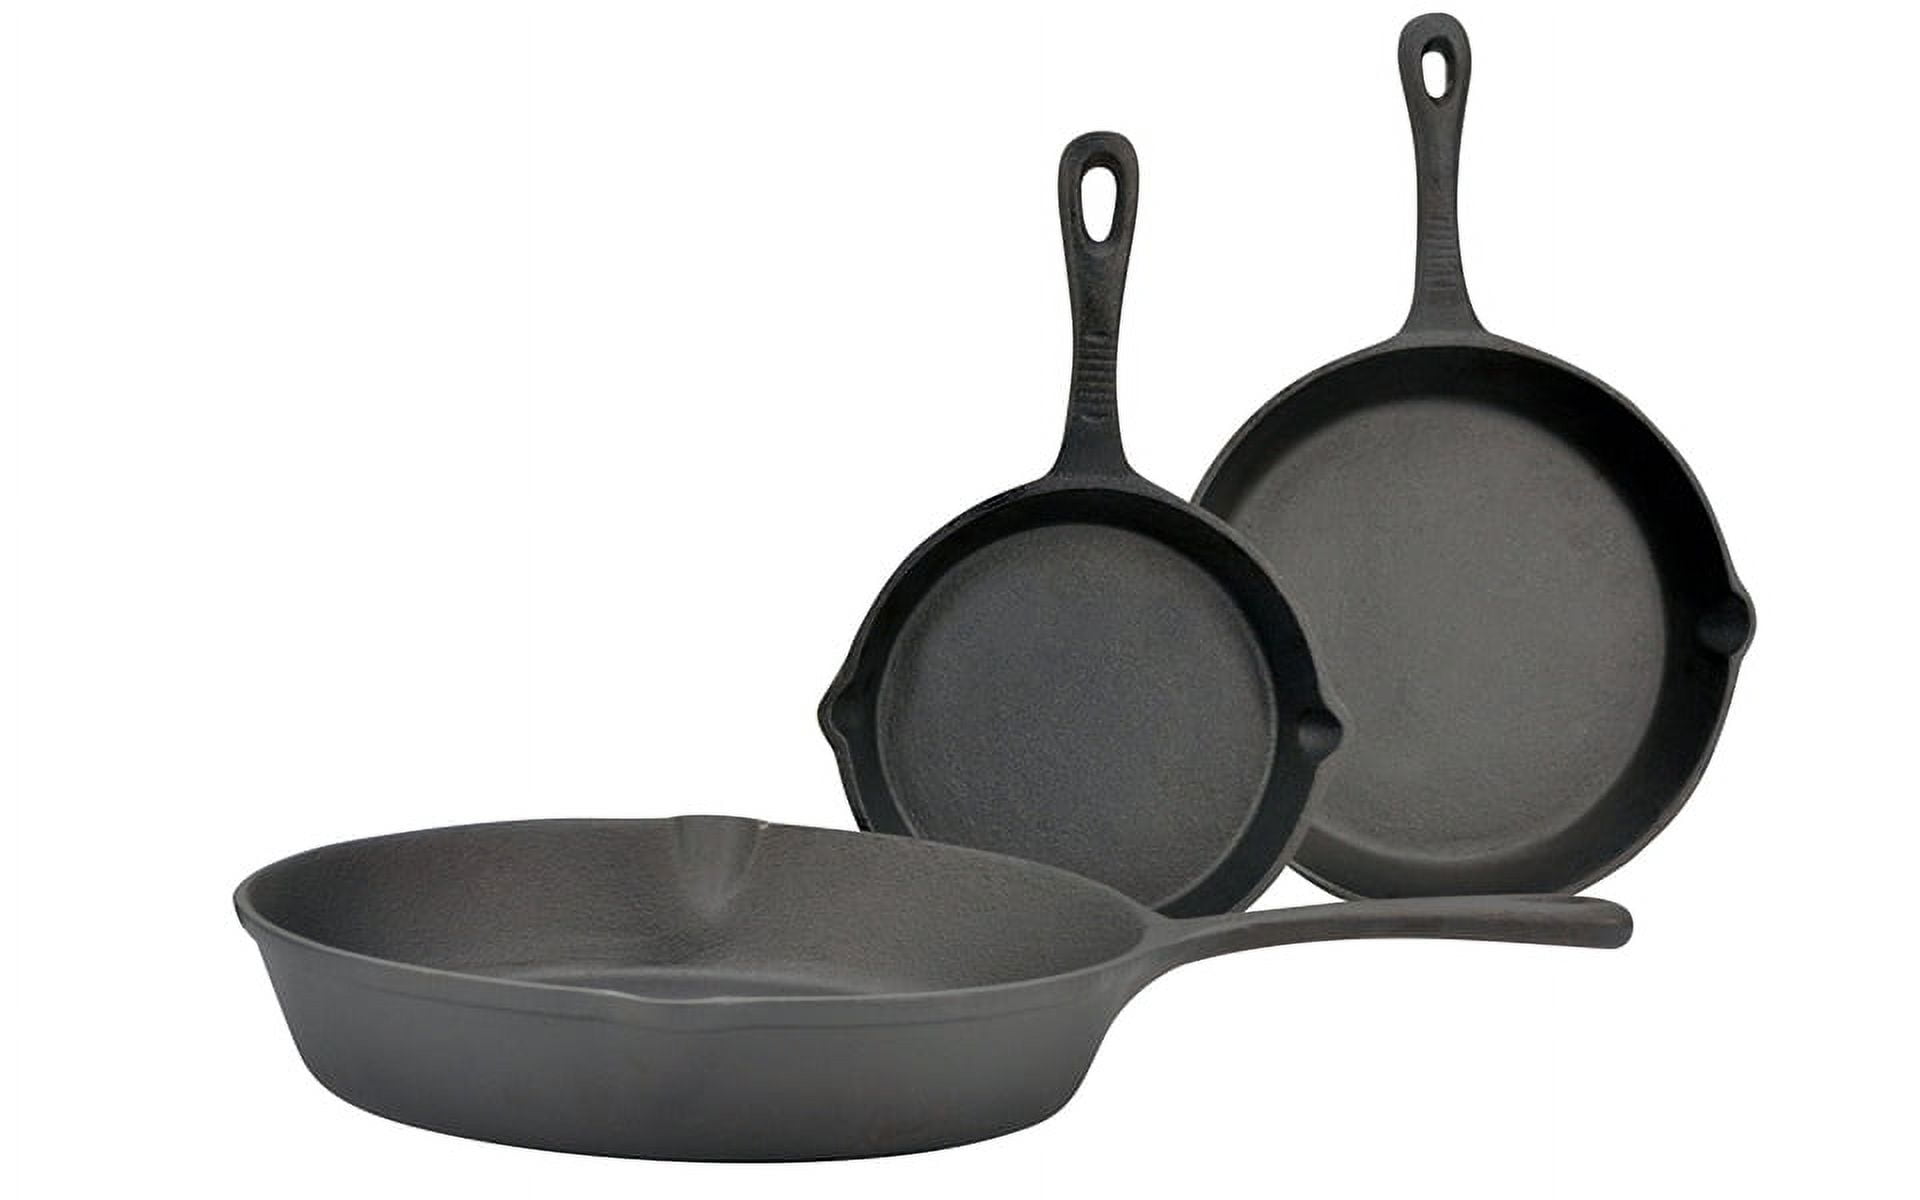 iMounTEK 3-Piece Pre-Seasoned Non-Stick BPA Free Cast Iron Pans, Cast Iron  Cookware for Grill, Oven, Electric & Gas Burner Stovetop, & Campfire, Cast